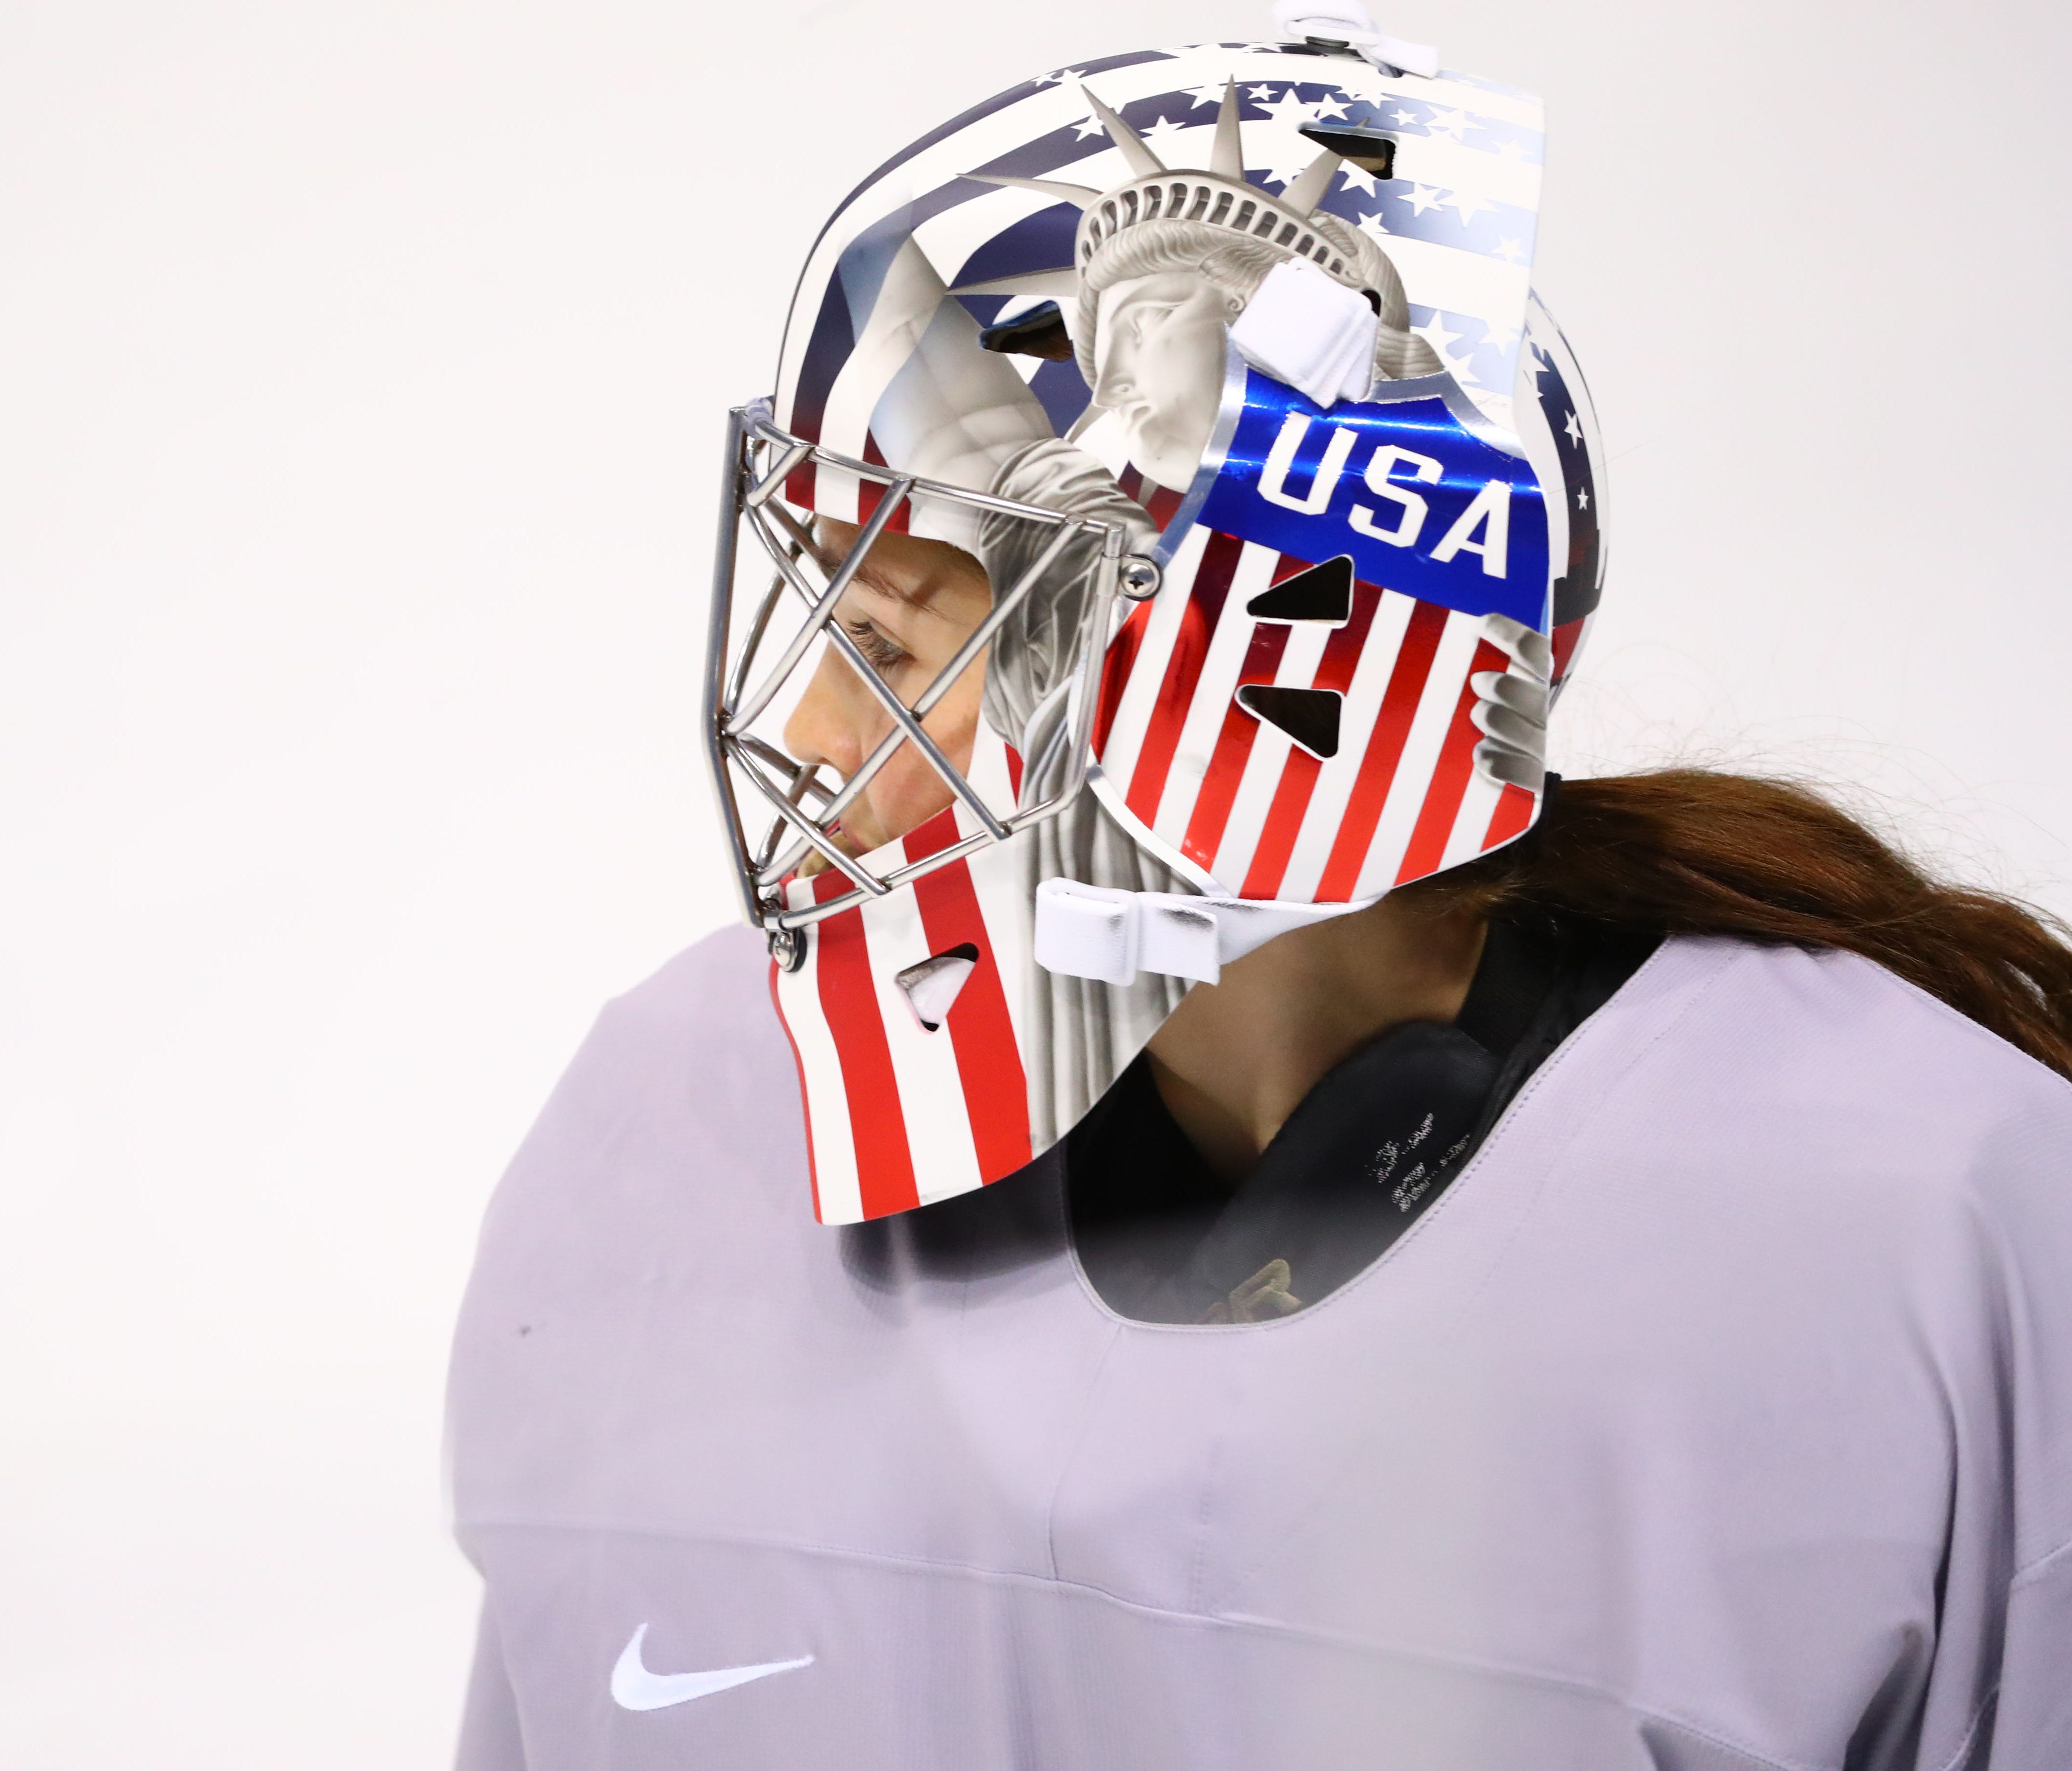 Nicole Hensley helped the USA win gold at the last two World Championships, but Robb Stauber hasn't committed to a starter yet for the Olympics.